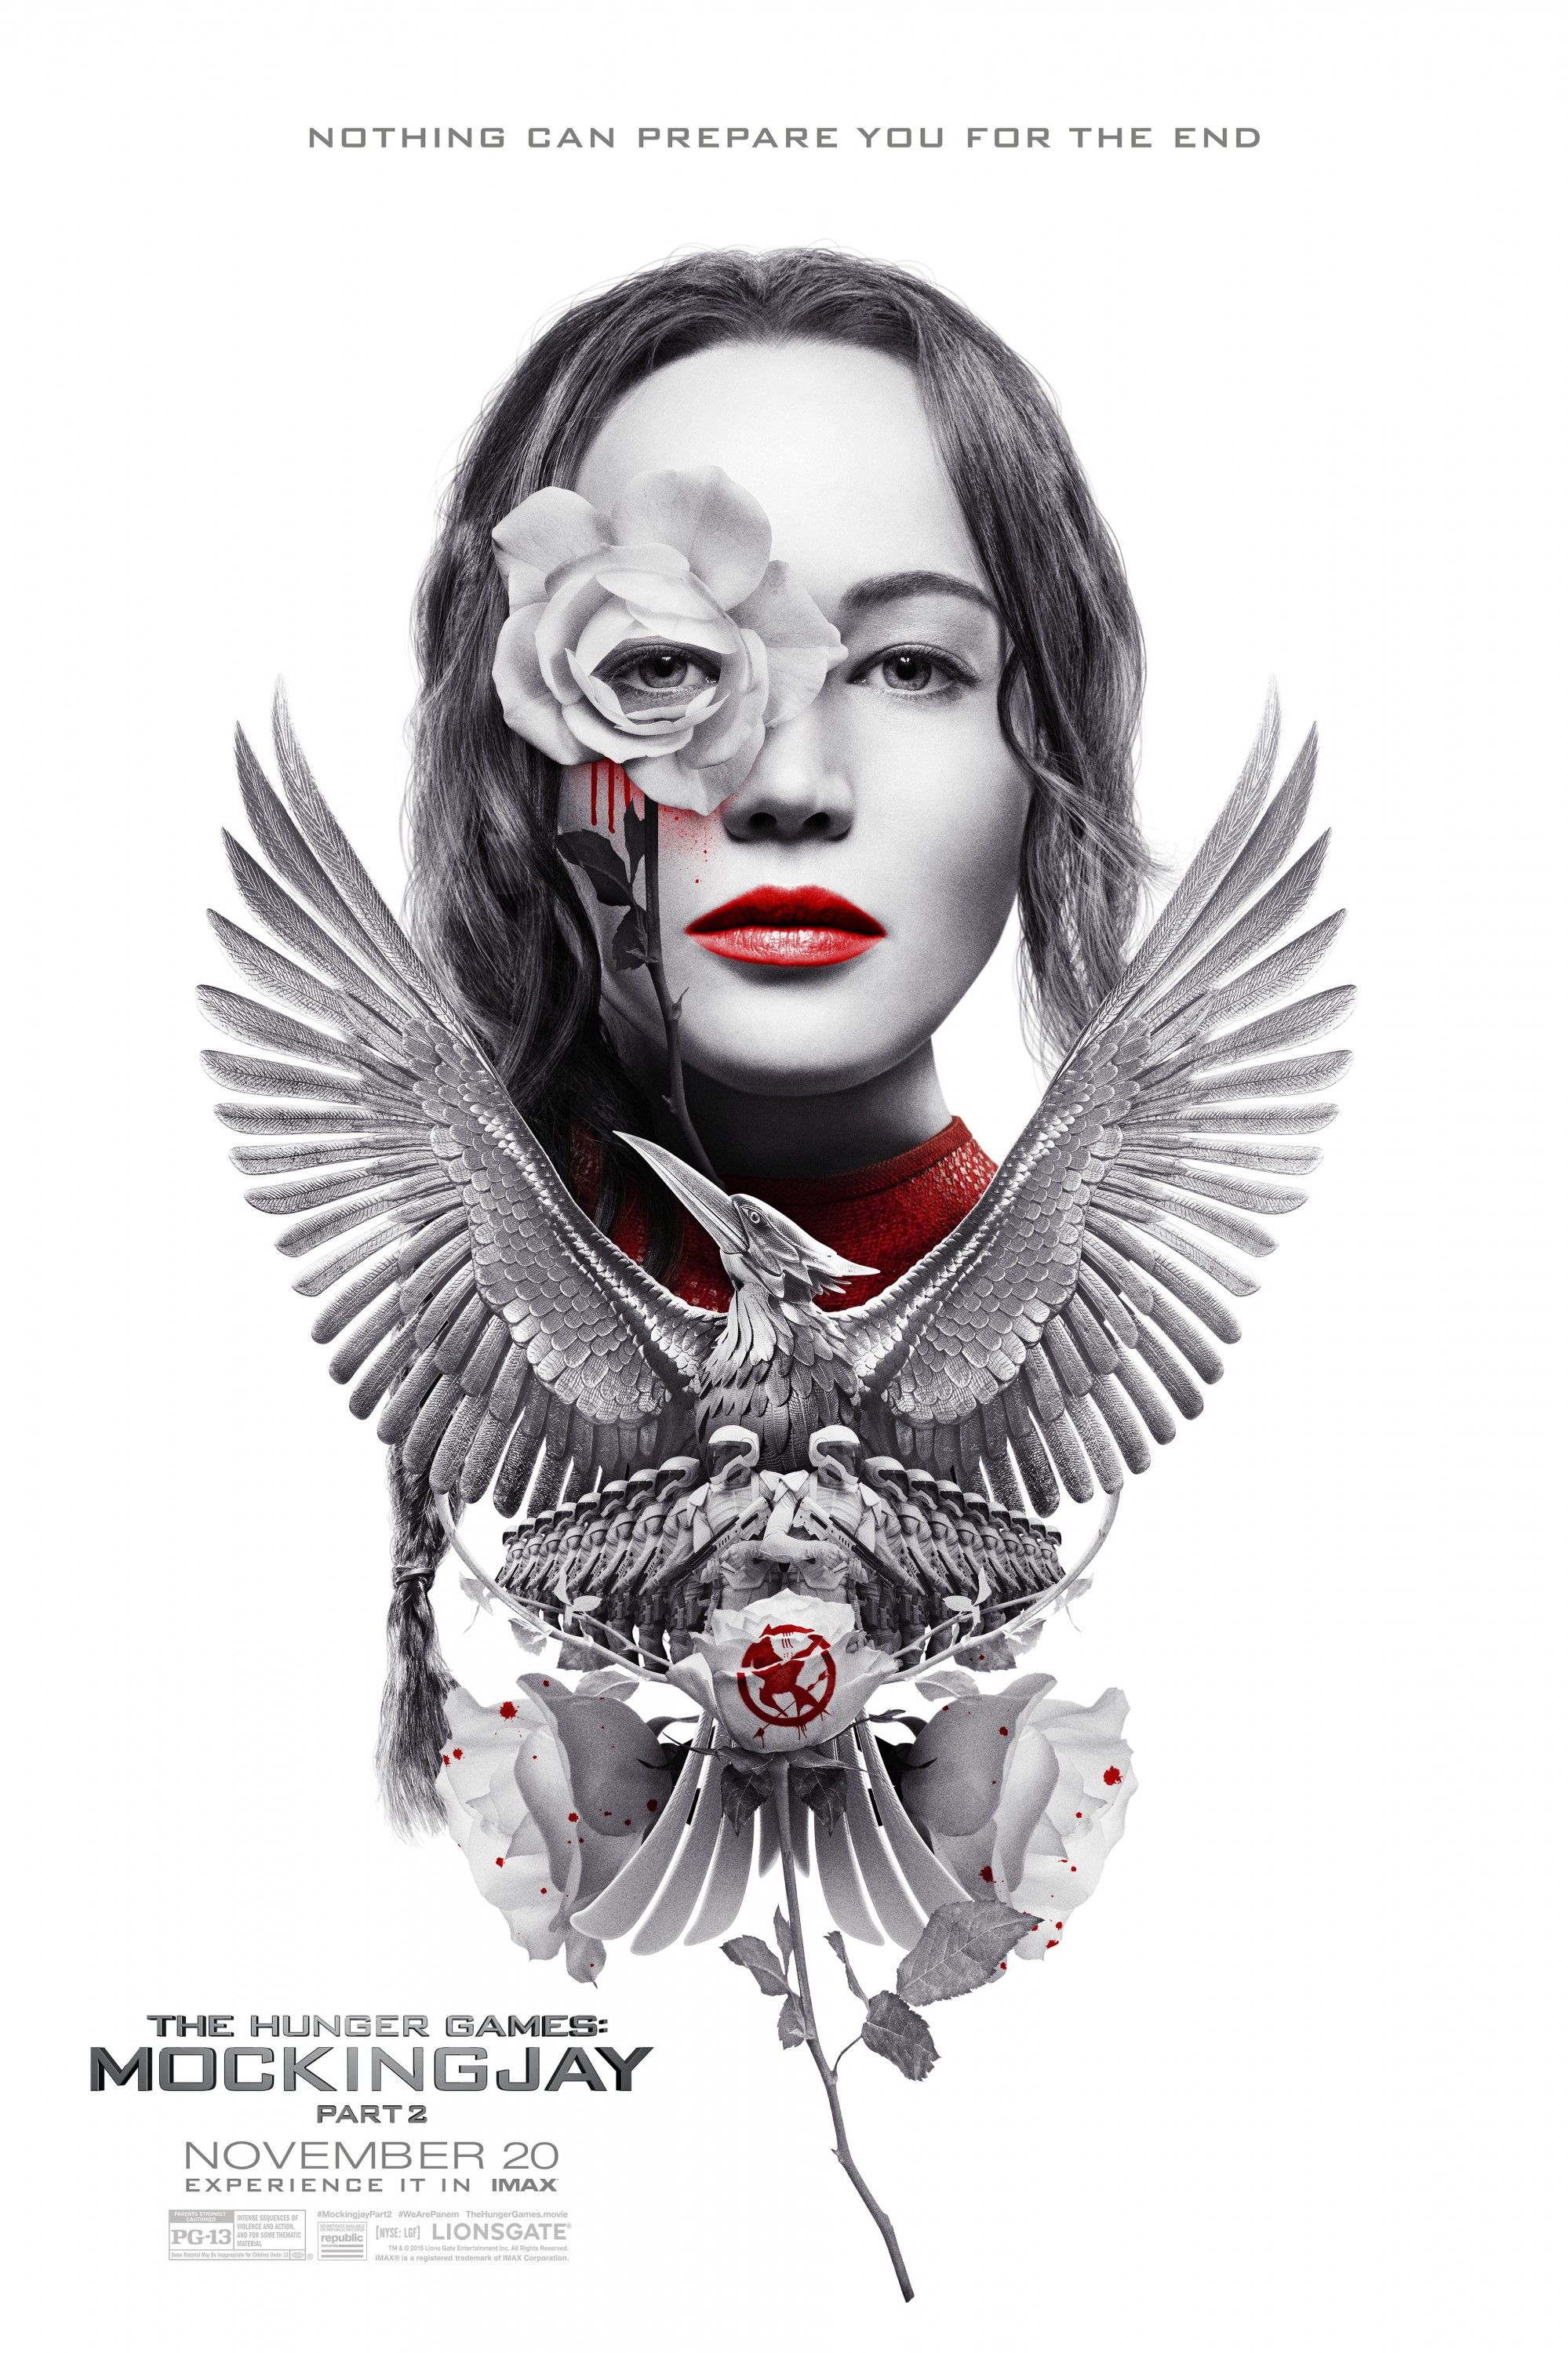 The Hunger Games: Mockingjay Part 2 IMAX Poster